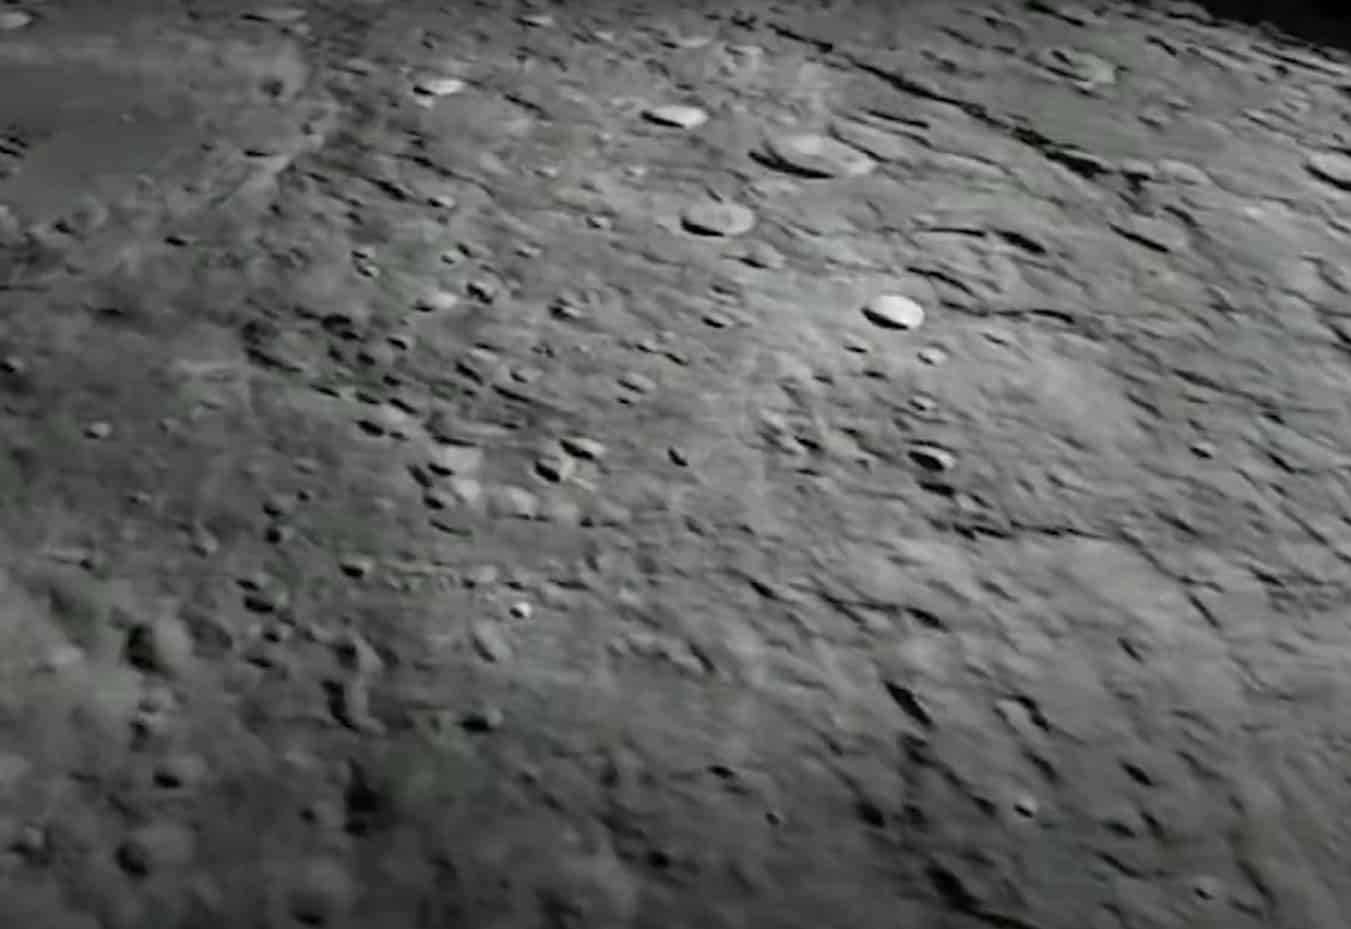 India's Chandrayaan-3 gears up for historic south pole moon landing
